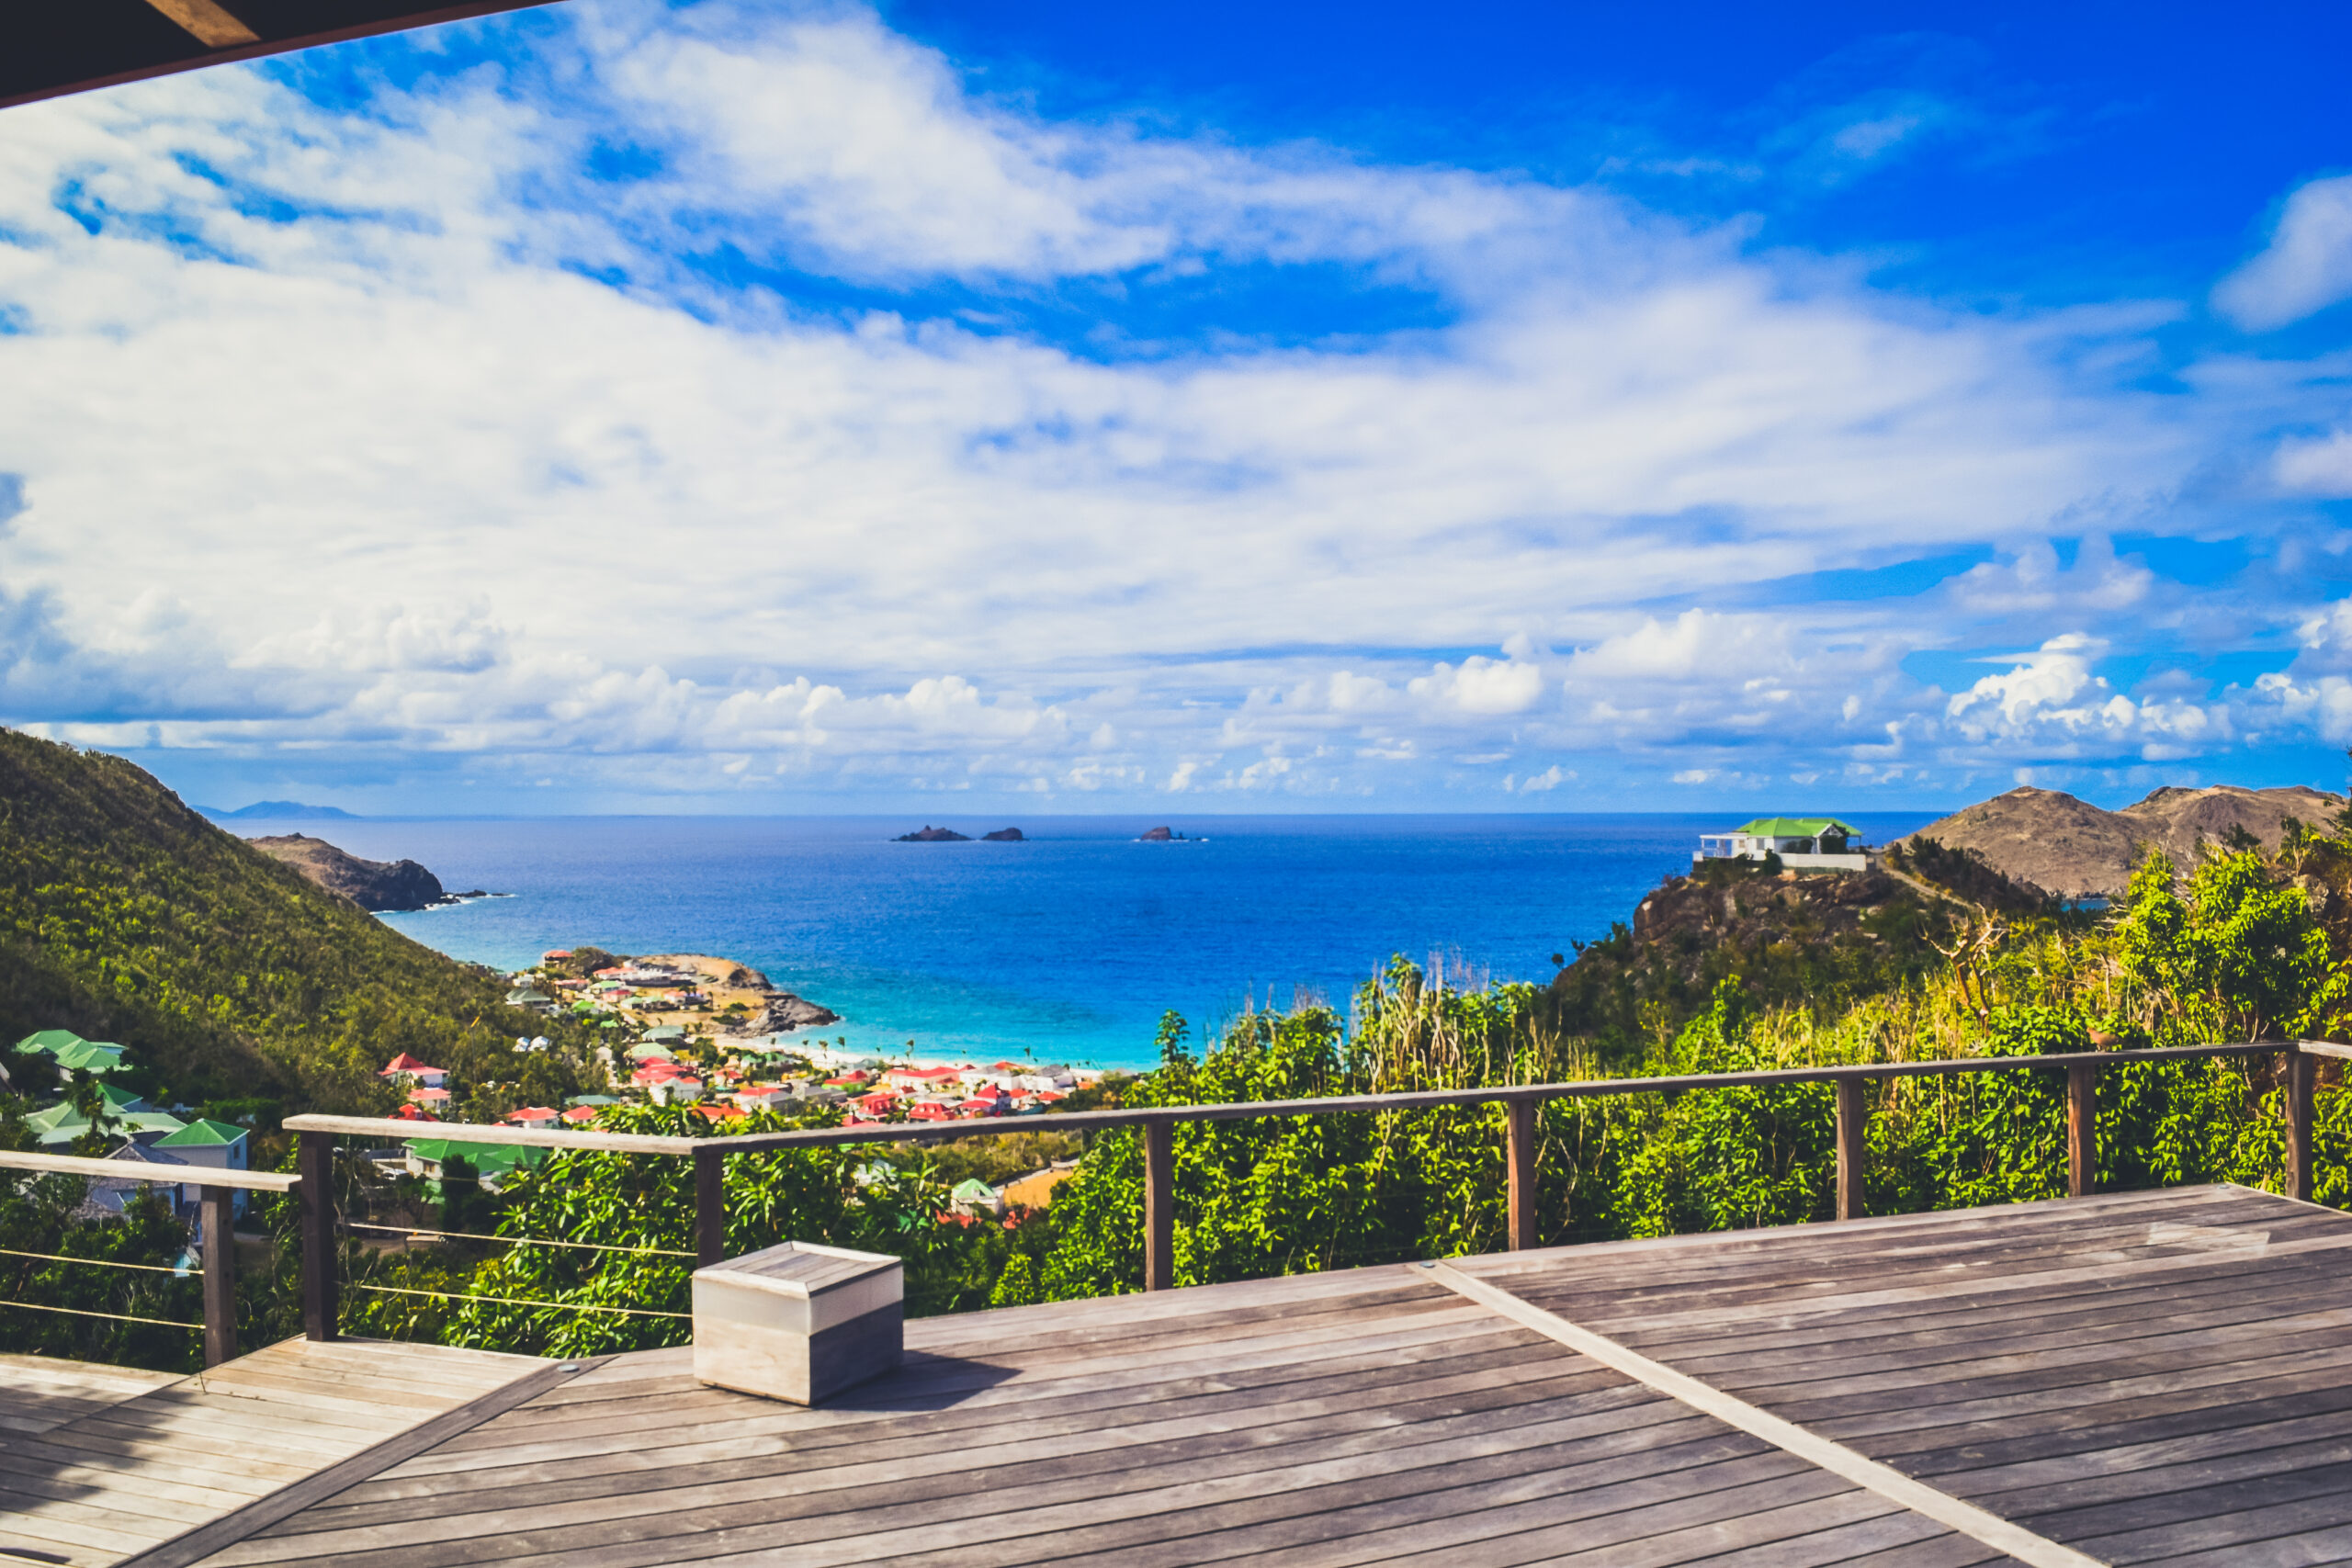 St Barth Travel Blog Where to Stay Flamands Colombier St. Barth Villa Culture Fabrice Cicognani AirBnb Coupon Code Travel Blog SVADORE Caribbean-29